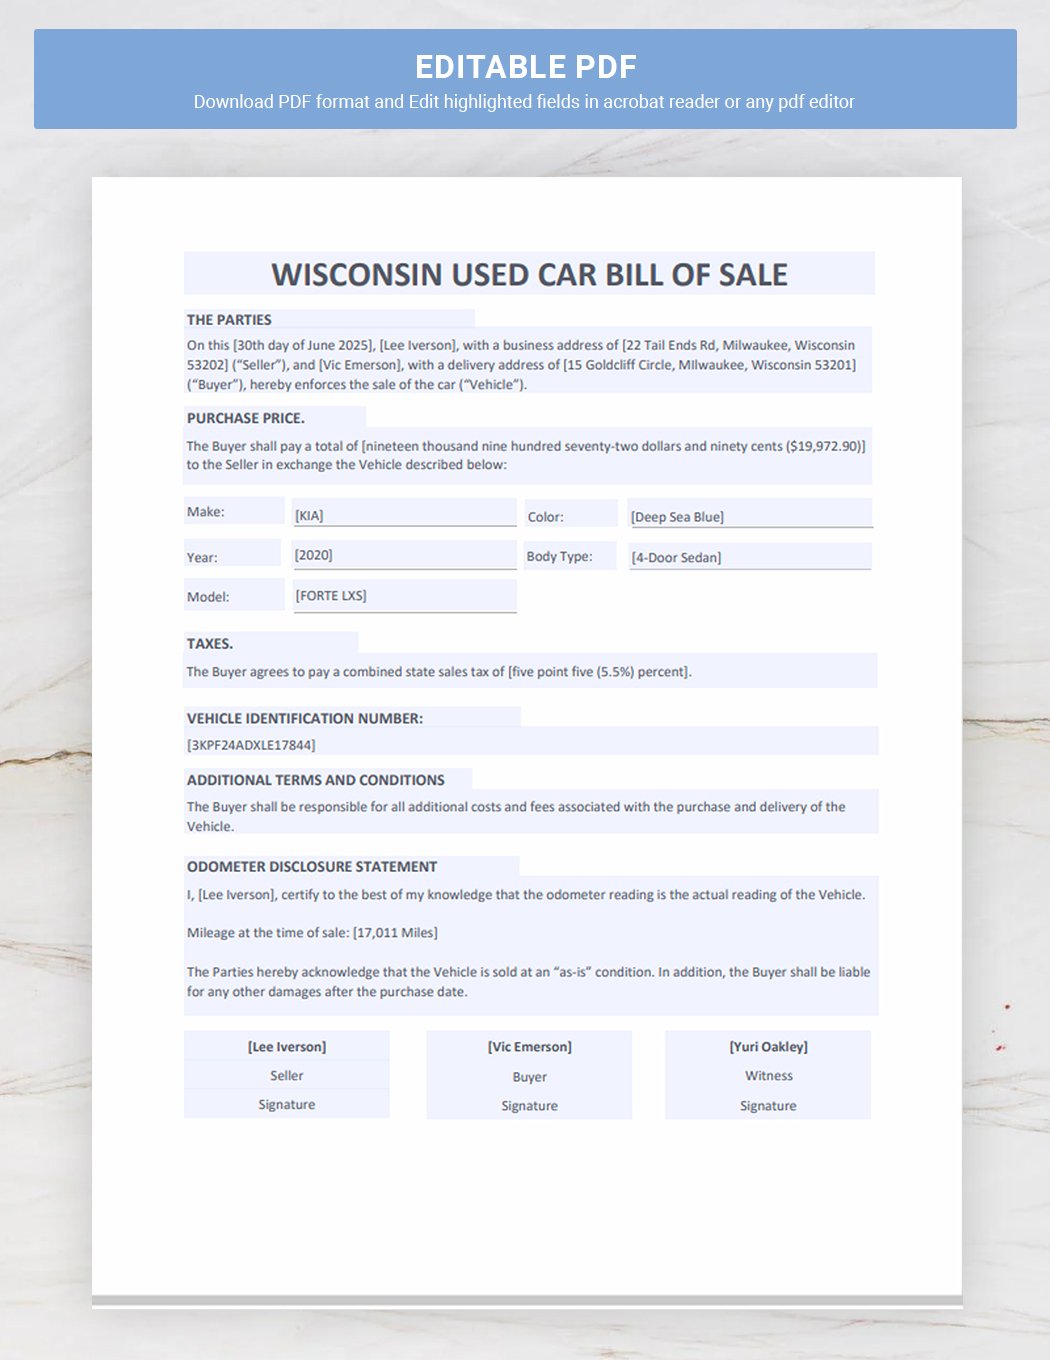 Wisconsin Used Car Bill of Sale Template in Google Docs Word PDF